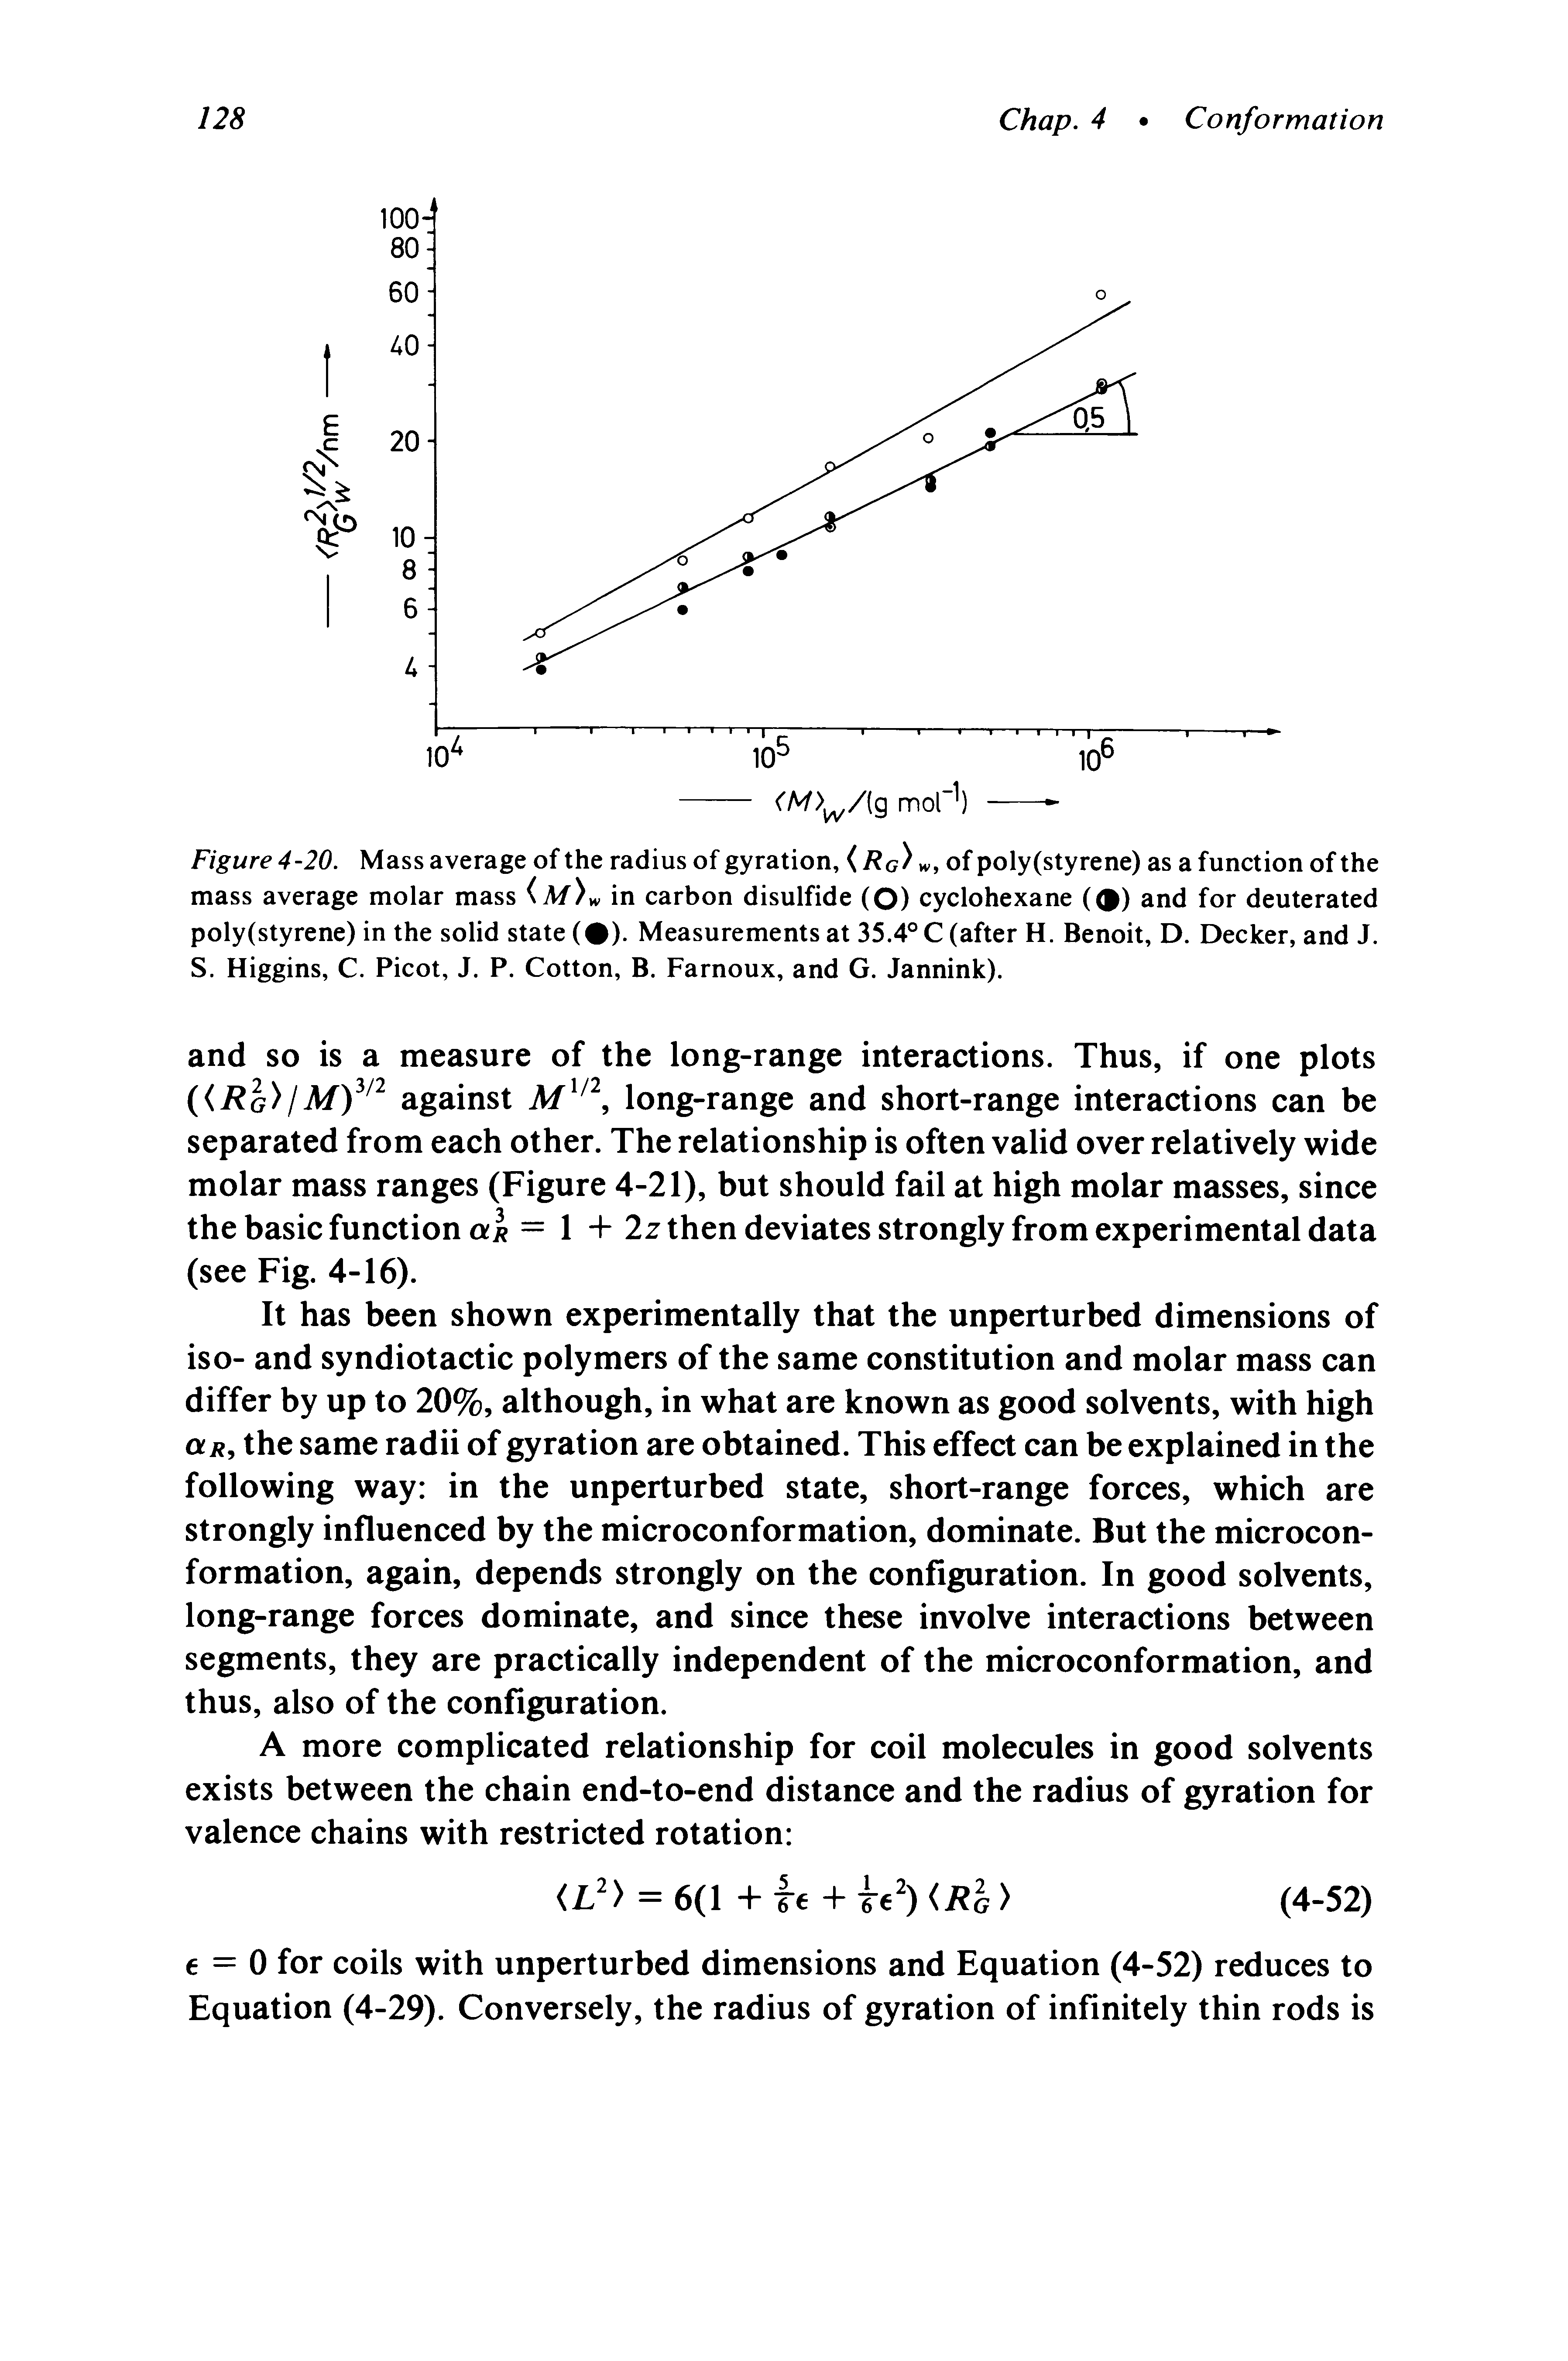 Figure 4-20. Mass average of the radius of gyration, Rg) w, of poly(styrene) as a function of the mass average molar mass m)w in carbon disulfide (O) cyclohexane ((P) and for deuterated poly(styrene) in the solid state ( ). Measurements at 35.4° C (after H. Benoit, D. Decker, and J. S. Higgins, C. Picot, J. P. Cotton, B. Farnoux, and G. Jannink).